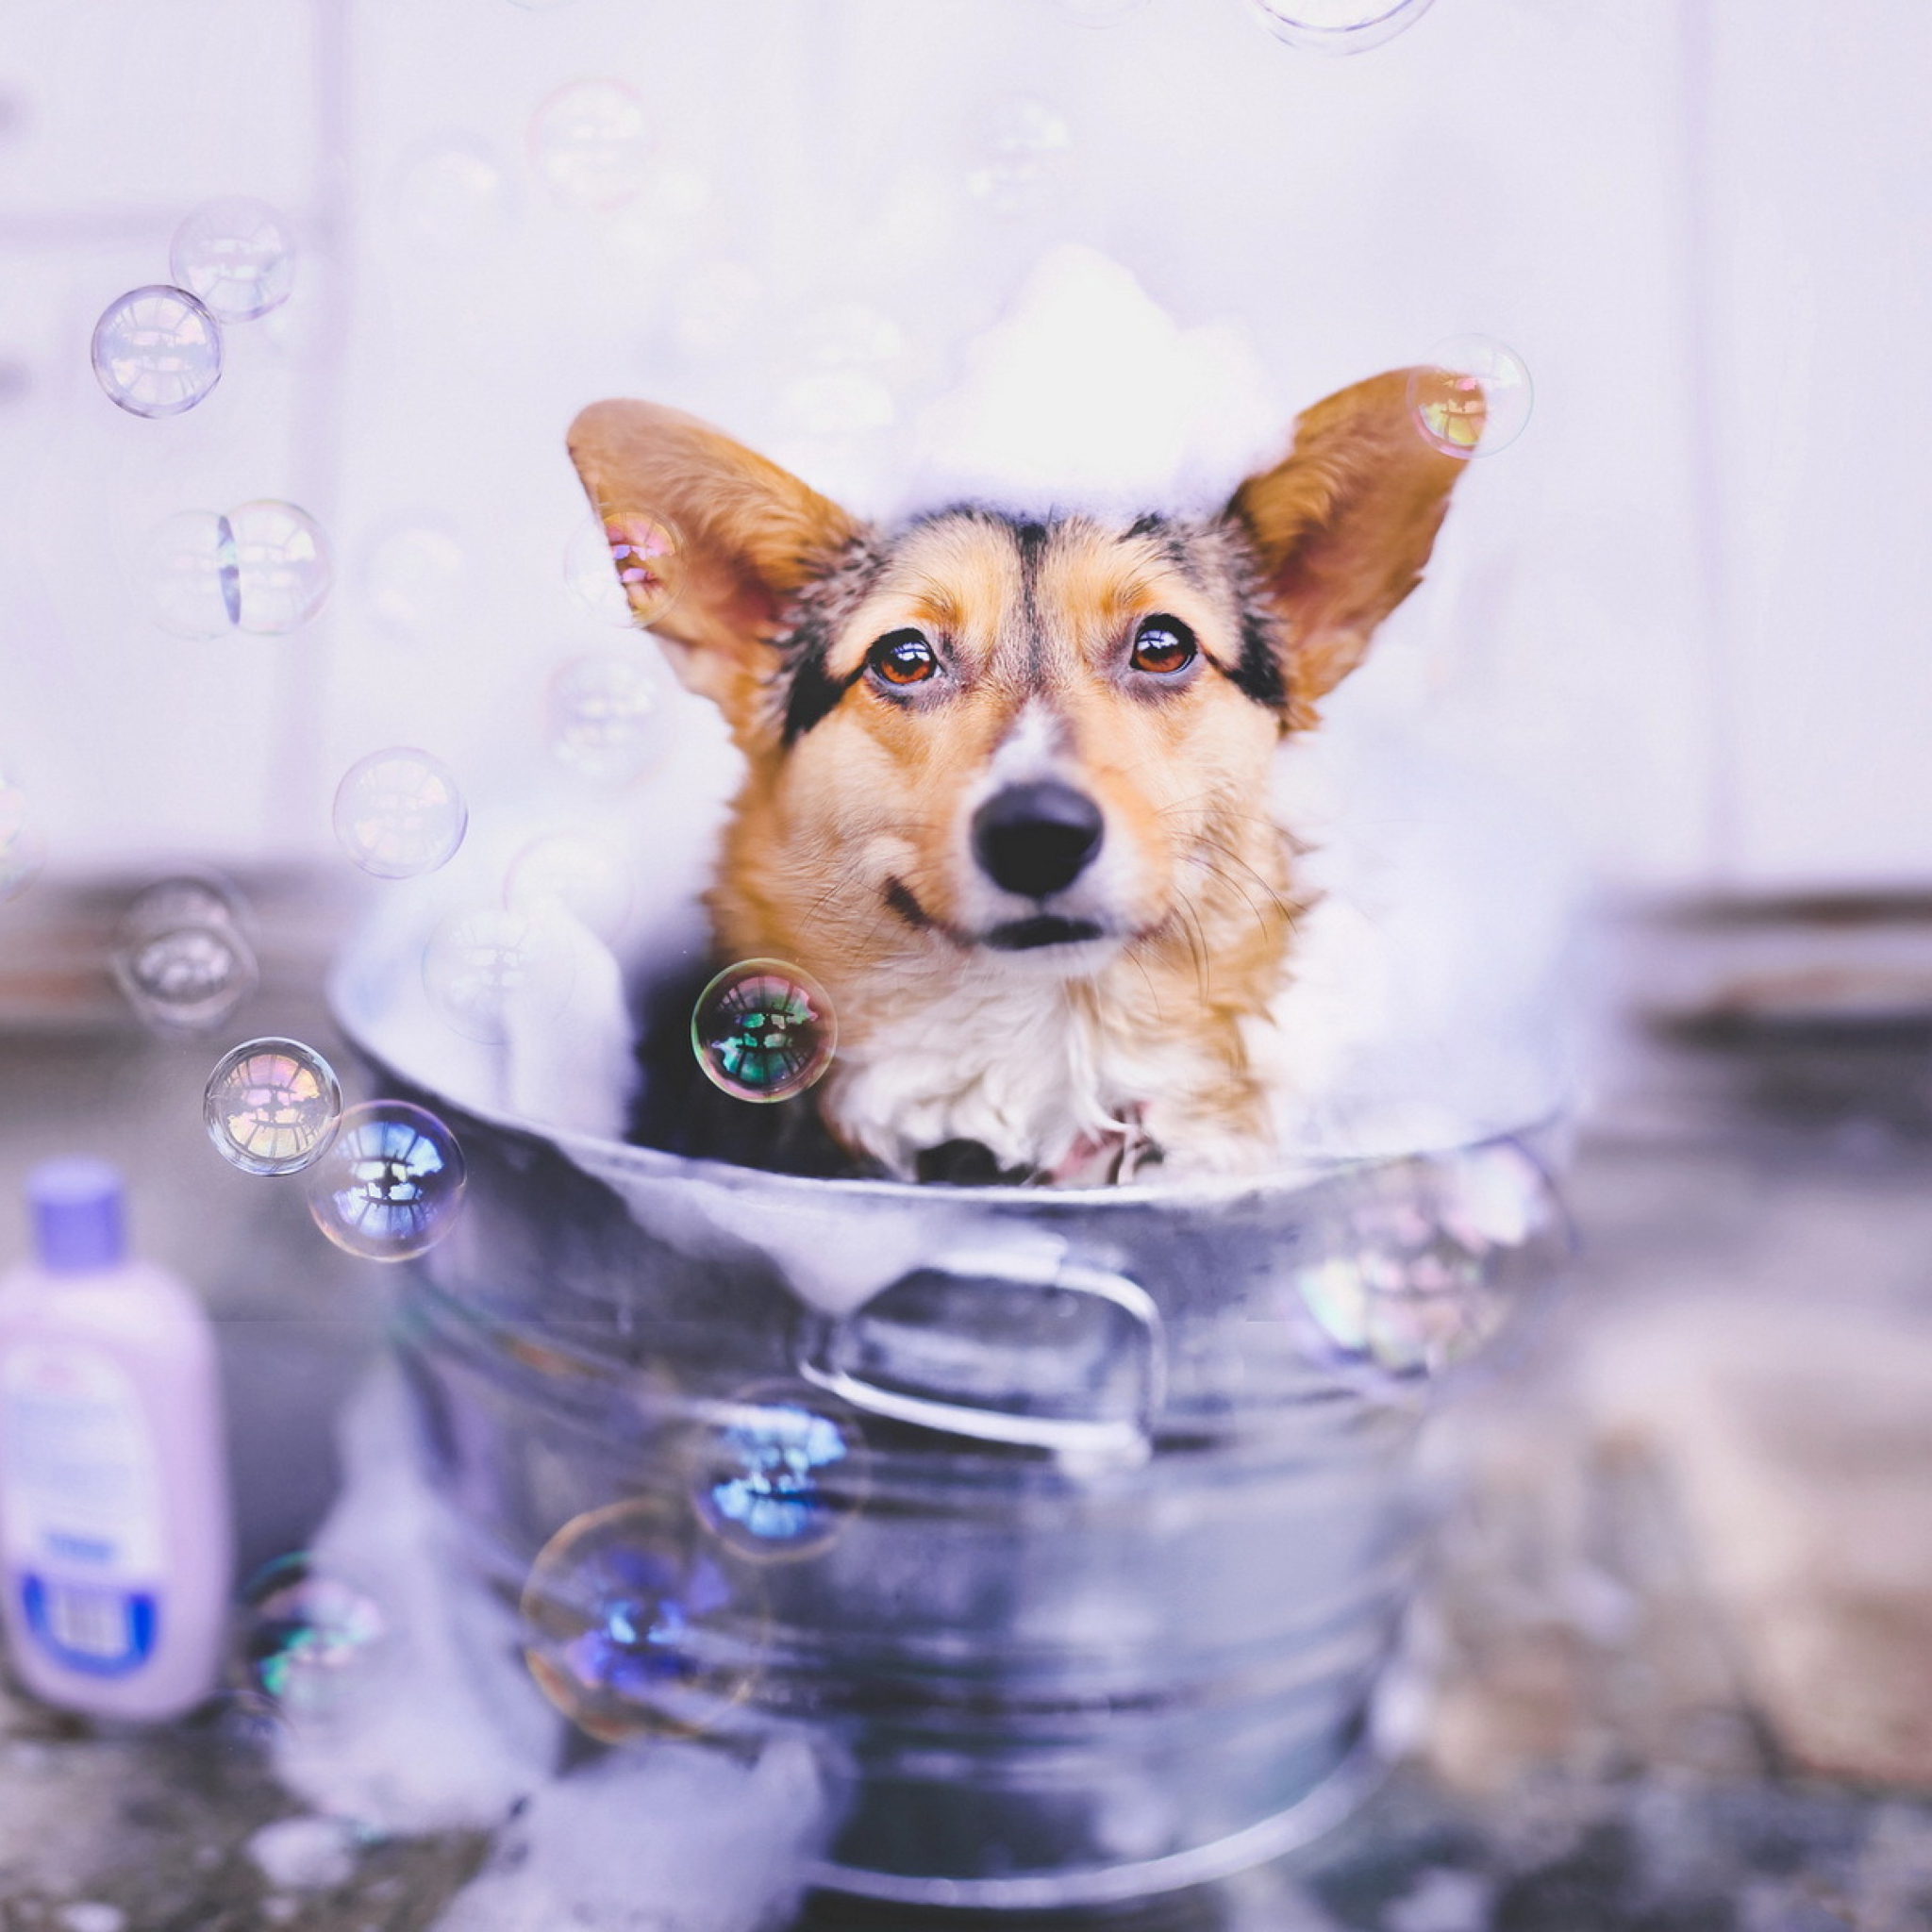 Dog And Bubbles wallpaper 2048x2048